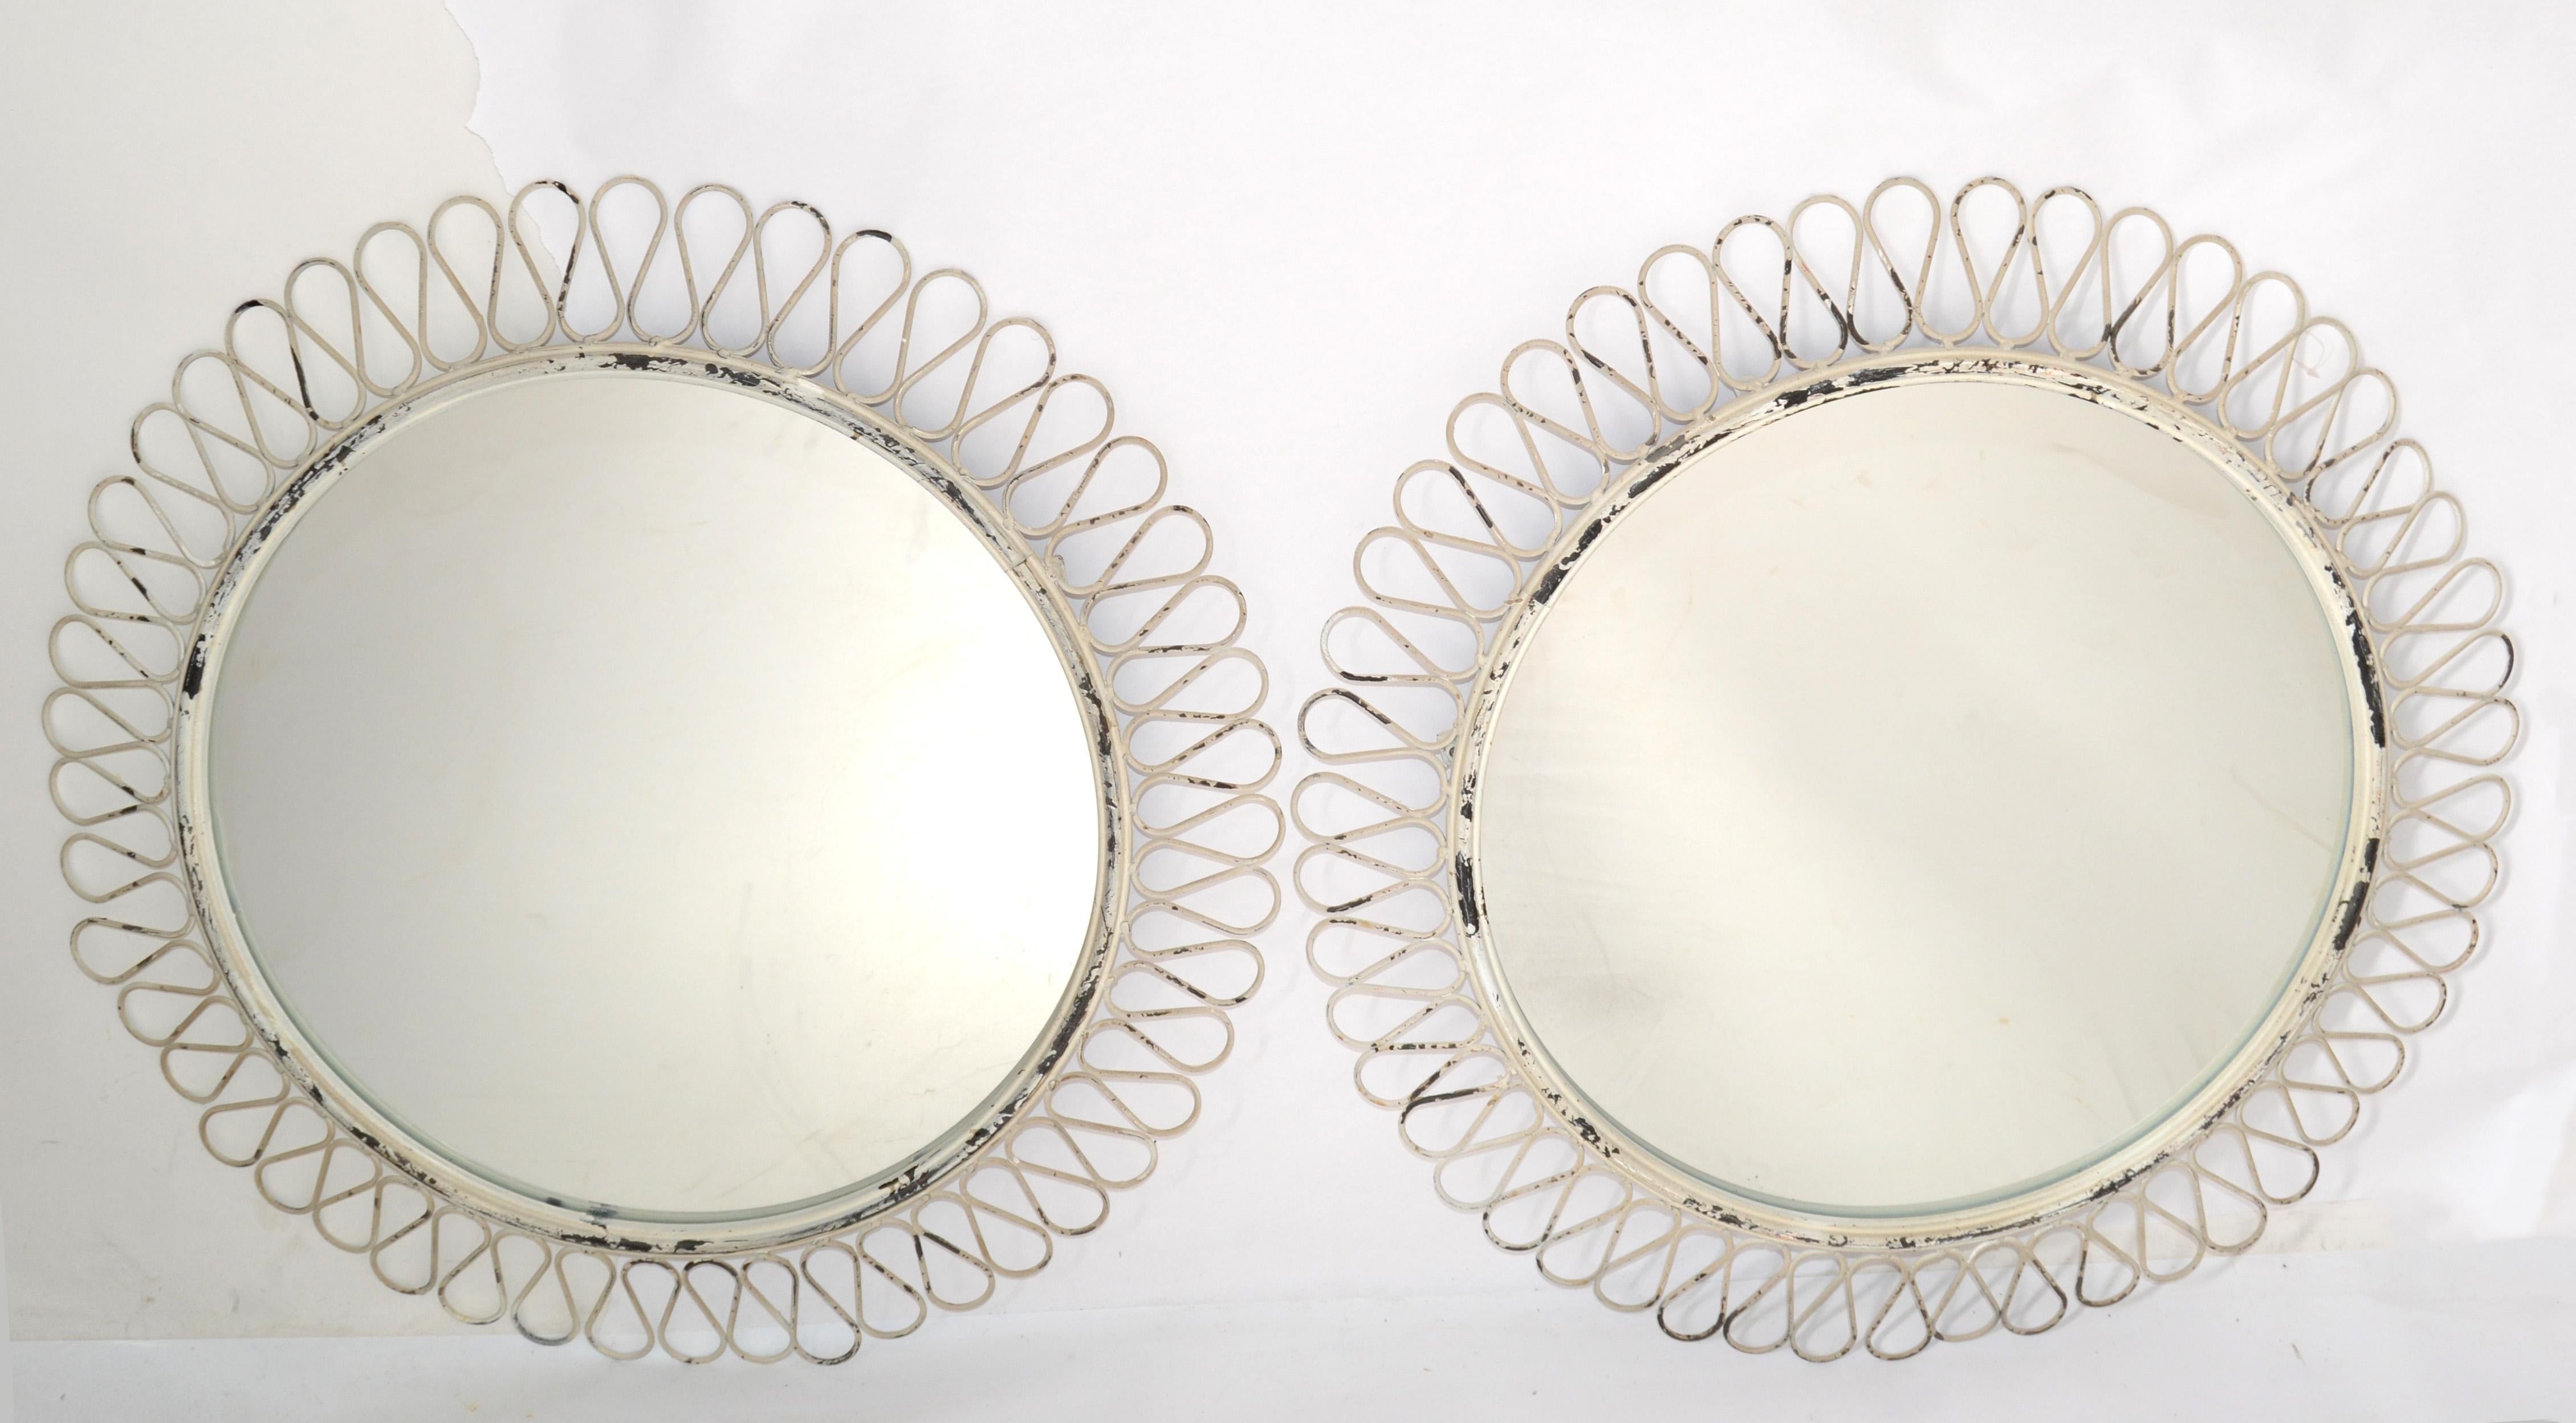 Pair of 1950s French distressed vintage off white wrought iron wall mirror or console mirror Art Deco style.
Handcrafted wrought iron border around the round mirror.
Secure Hanging construction on the reverse.
Stunning craftsmanship made in